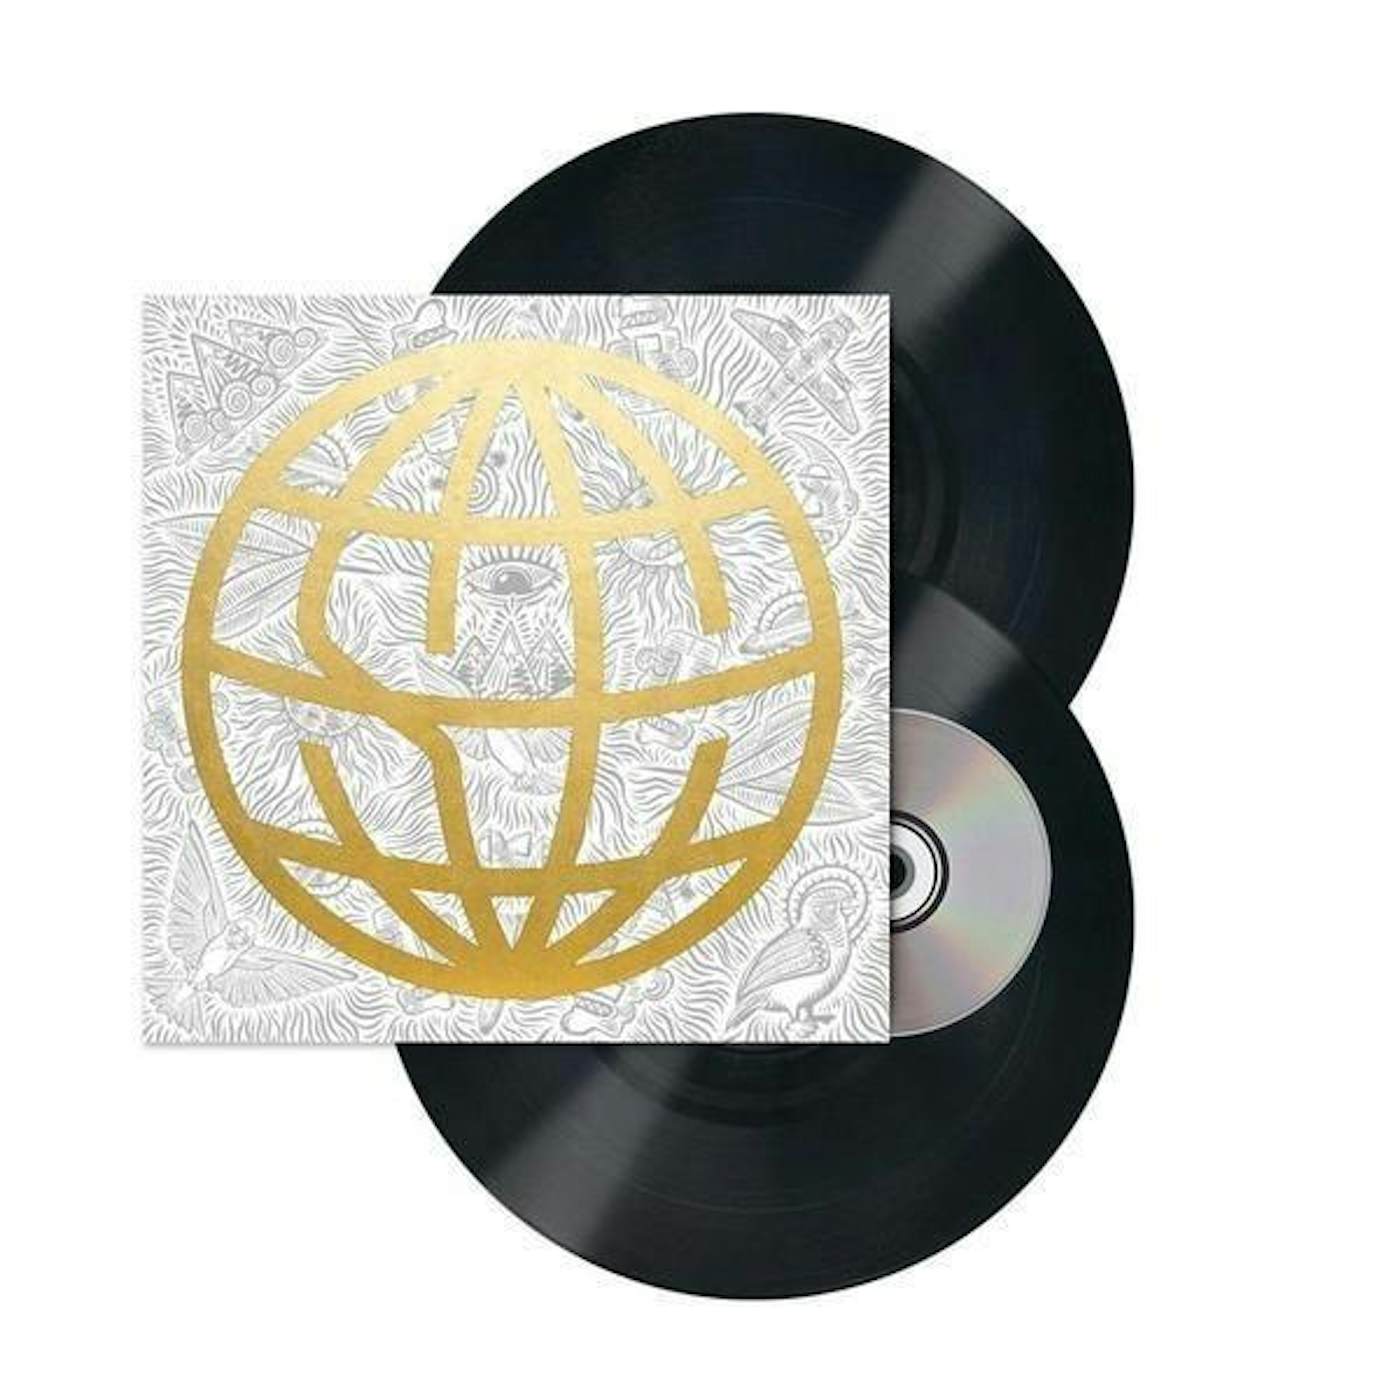 State Champs Around the World and Back (Deluxe Vinyl 2LP)